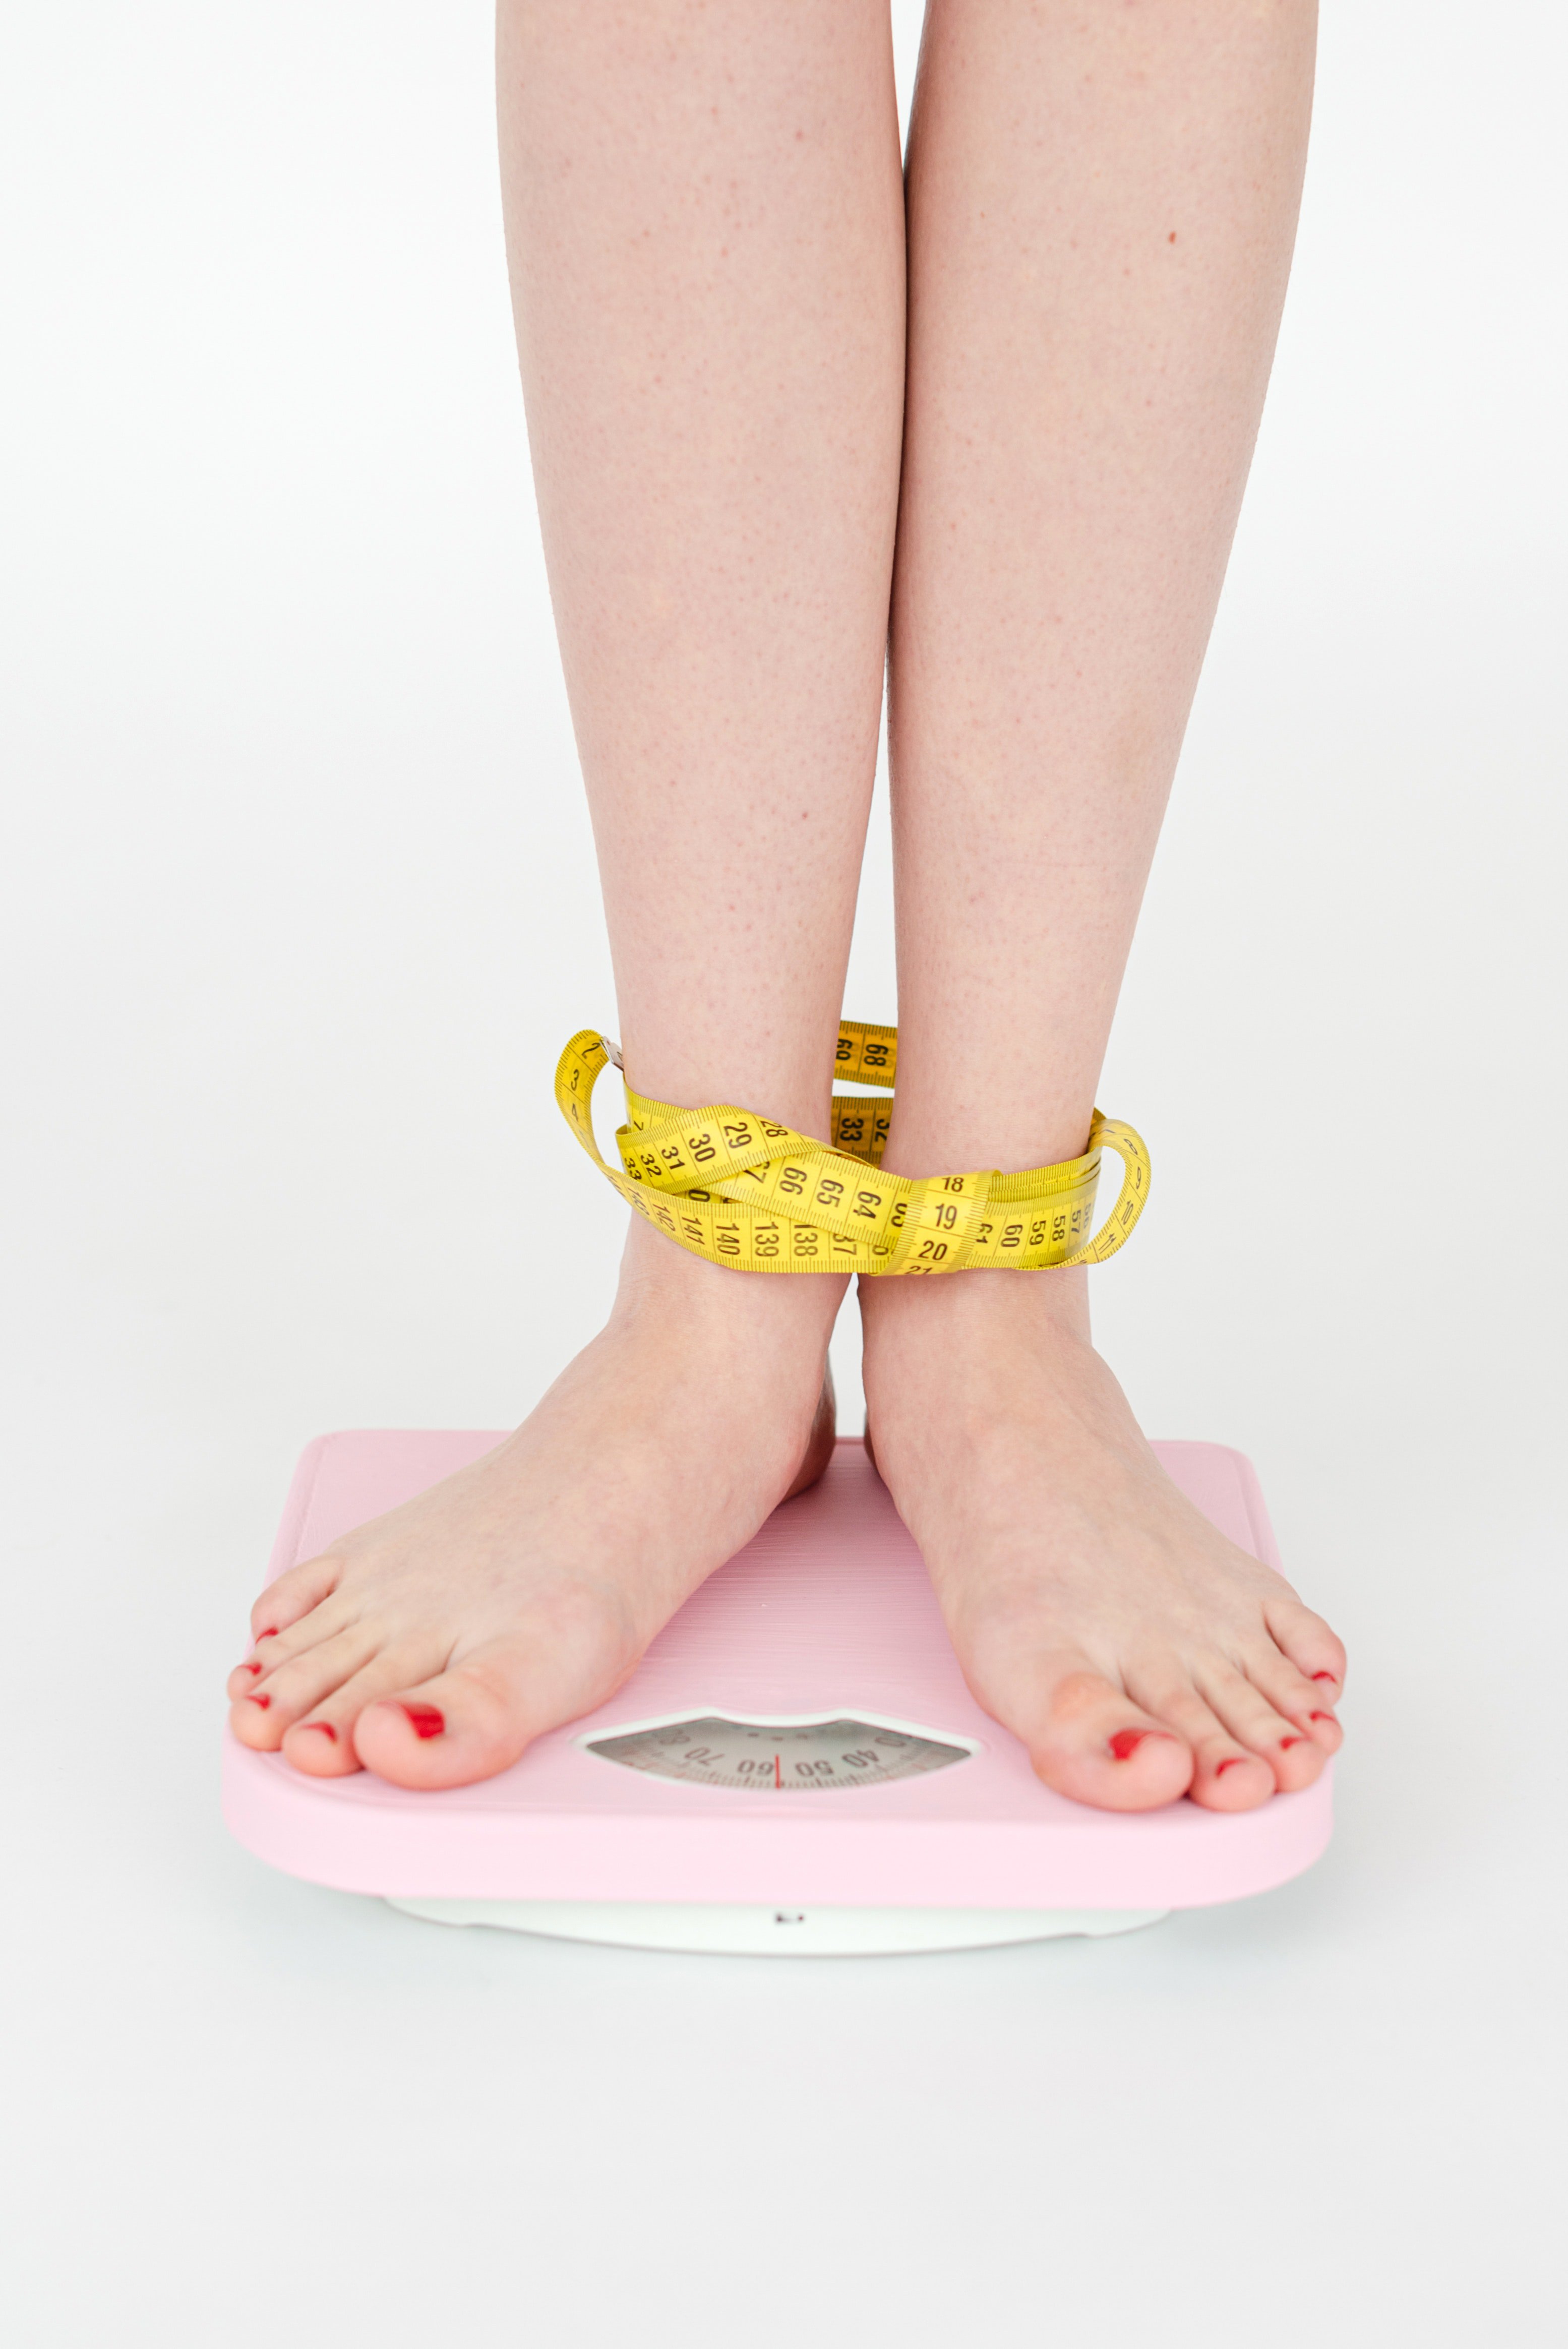 A woman standing on weighing scale